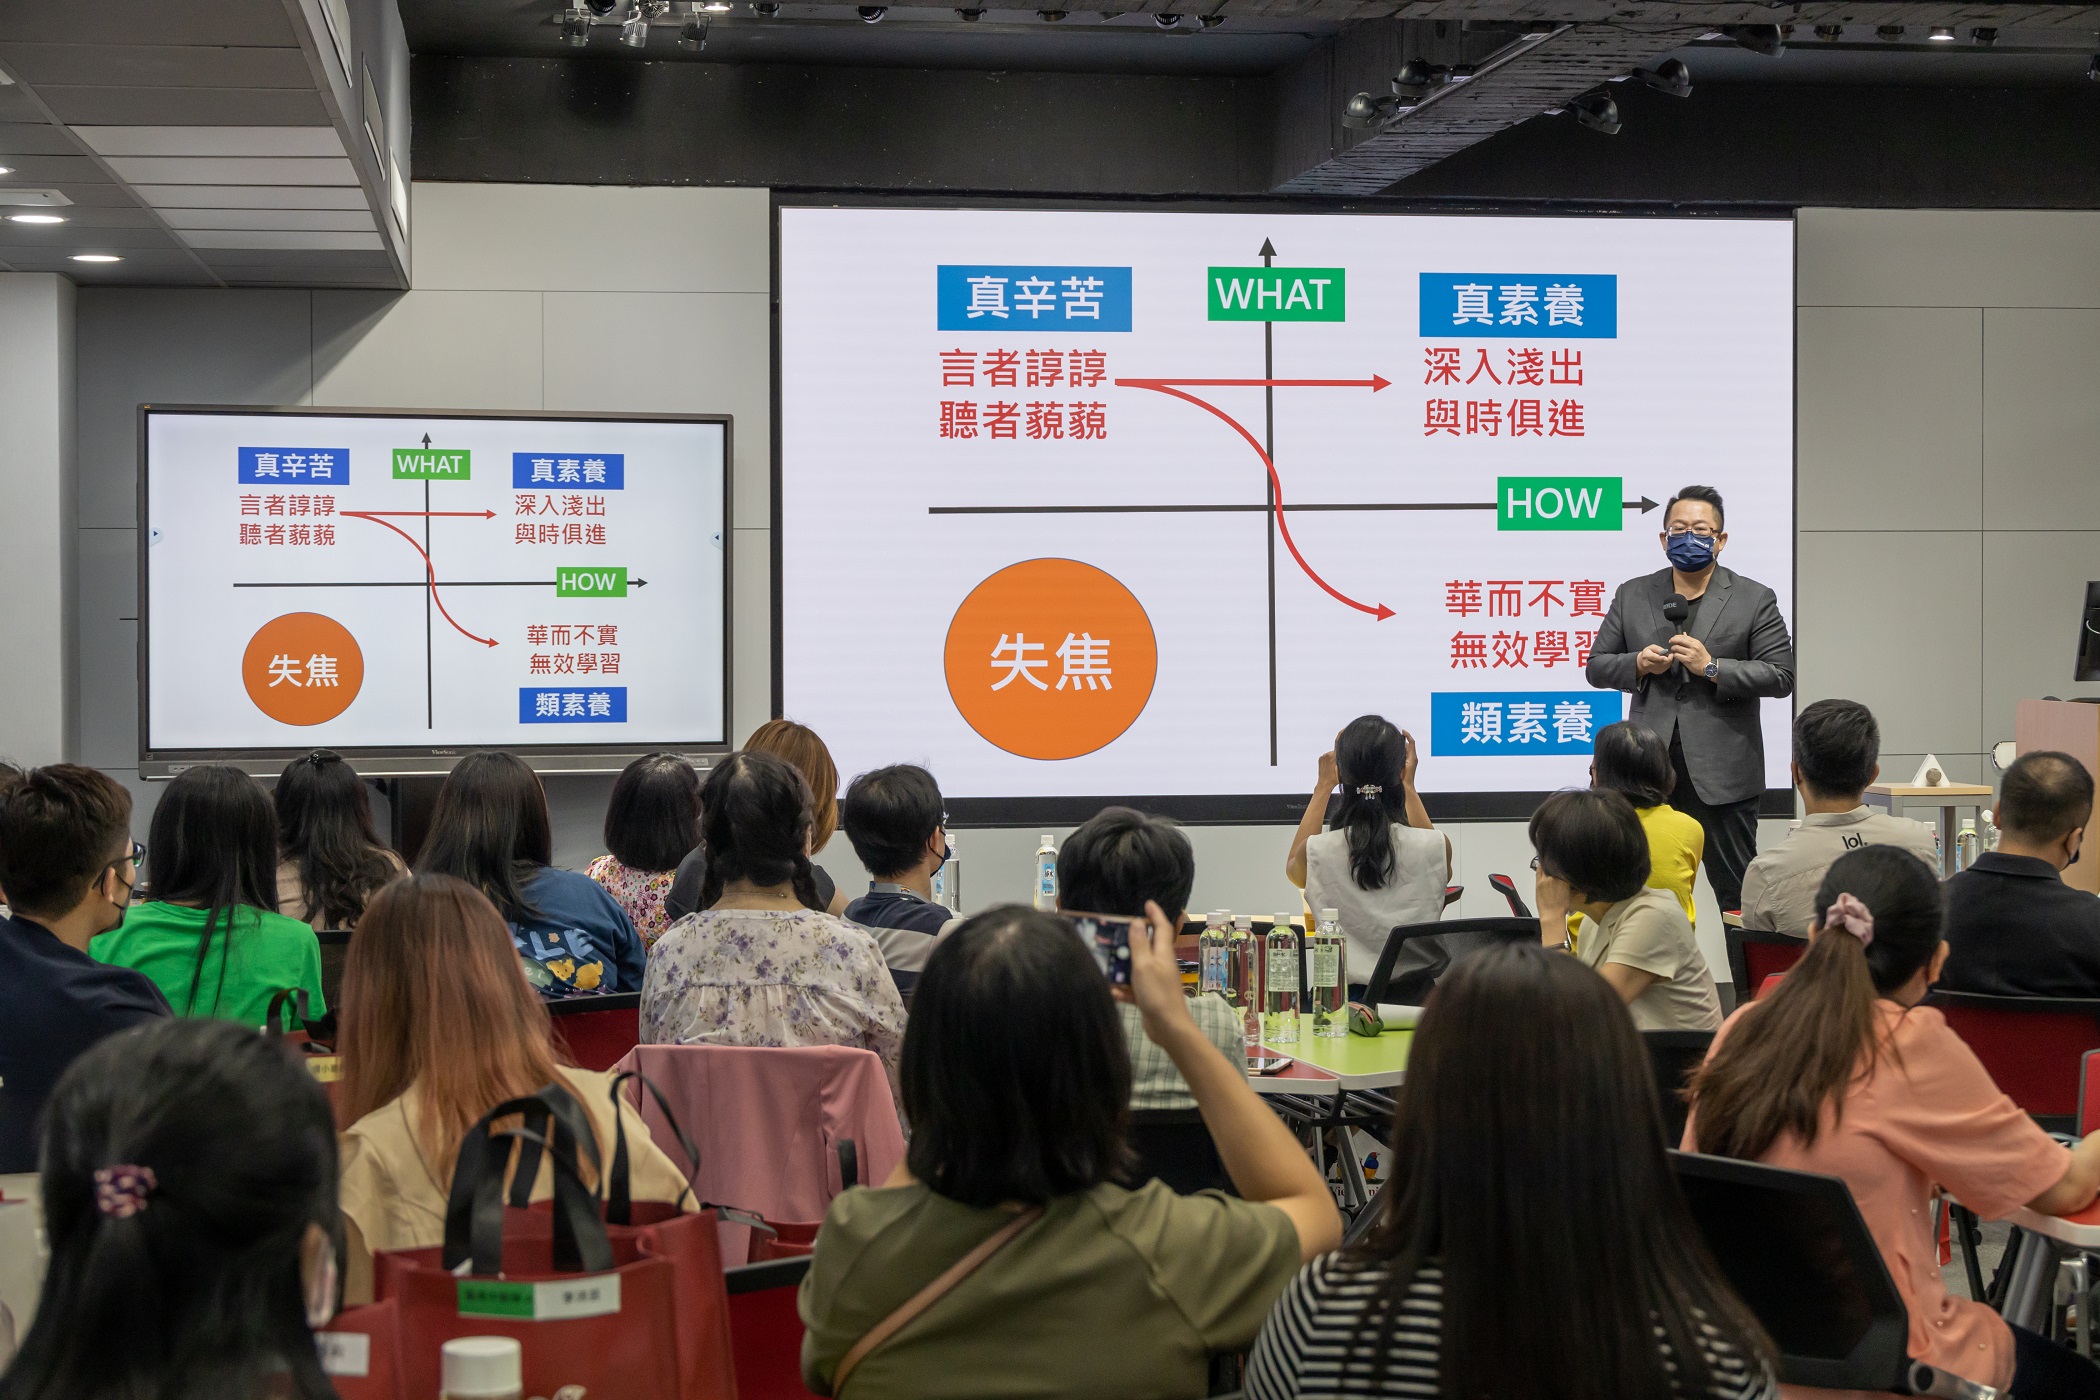 Alex Wang, the founder of Dream N shared his post-pandemic teaching experiences